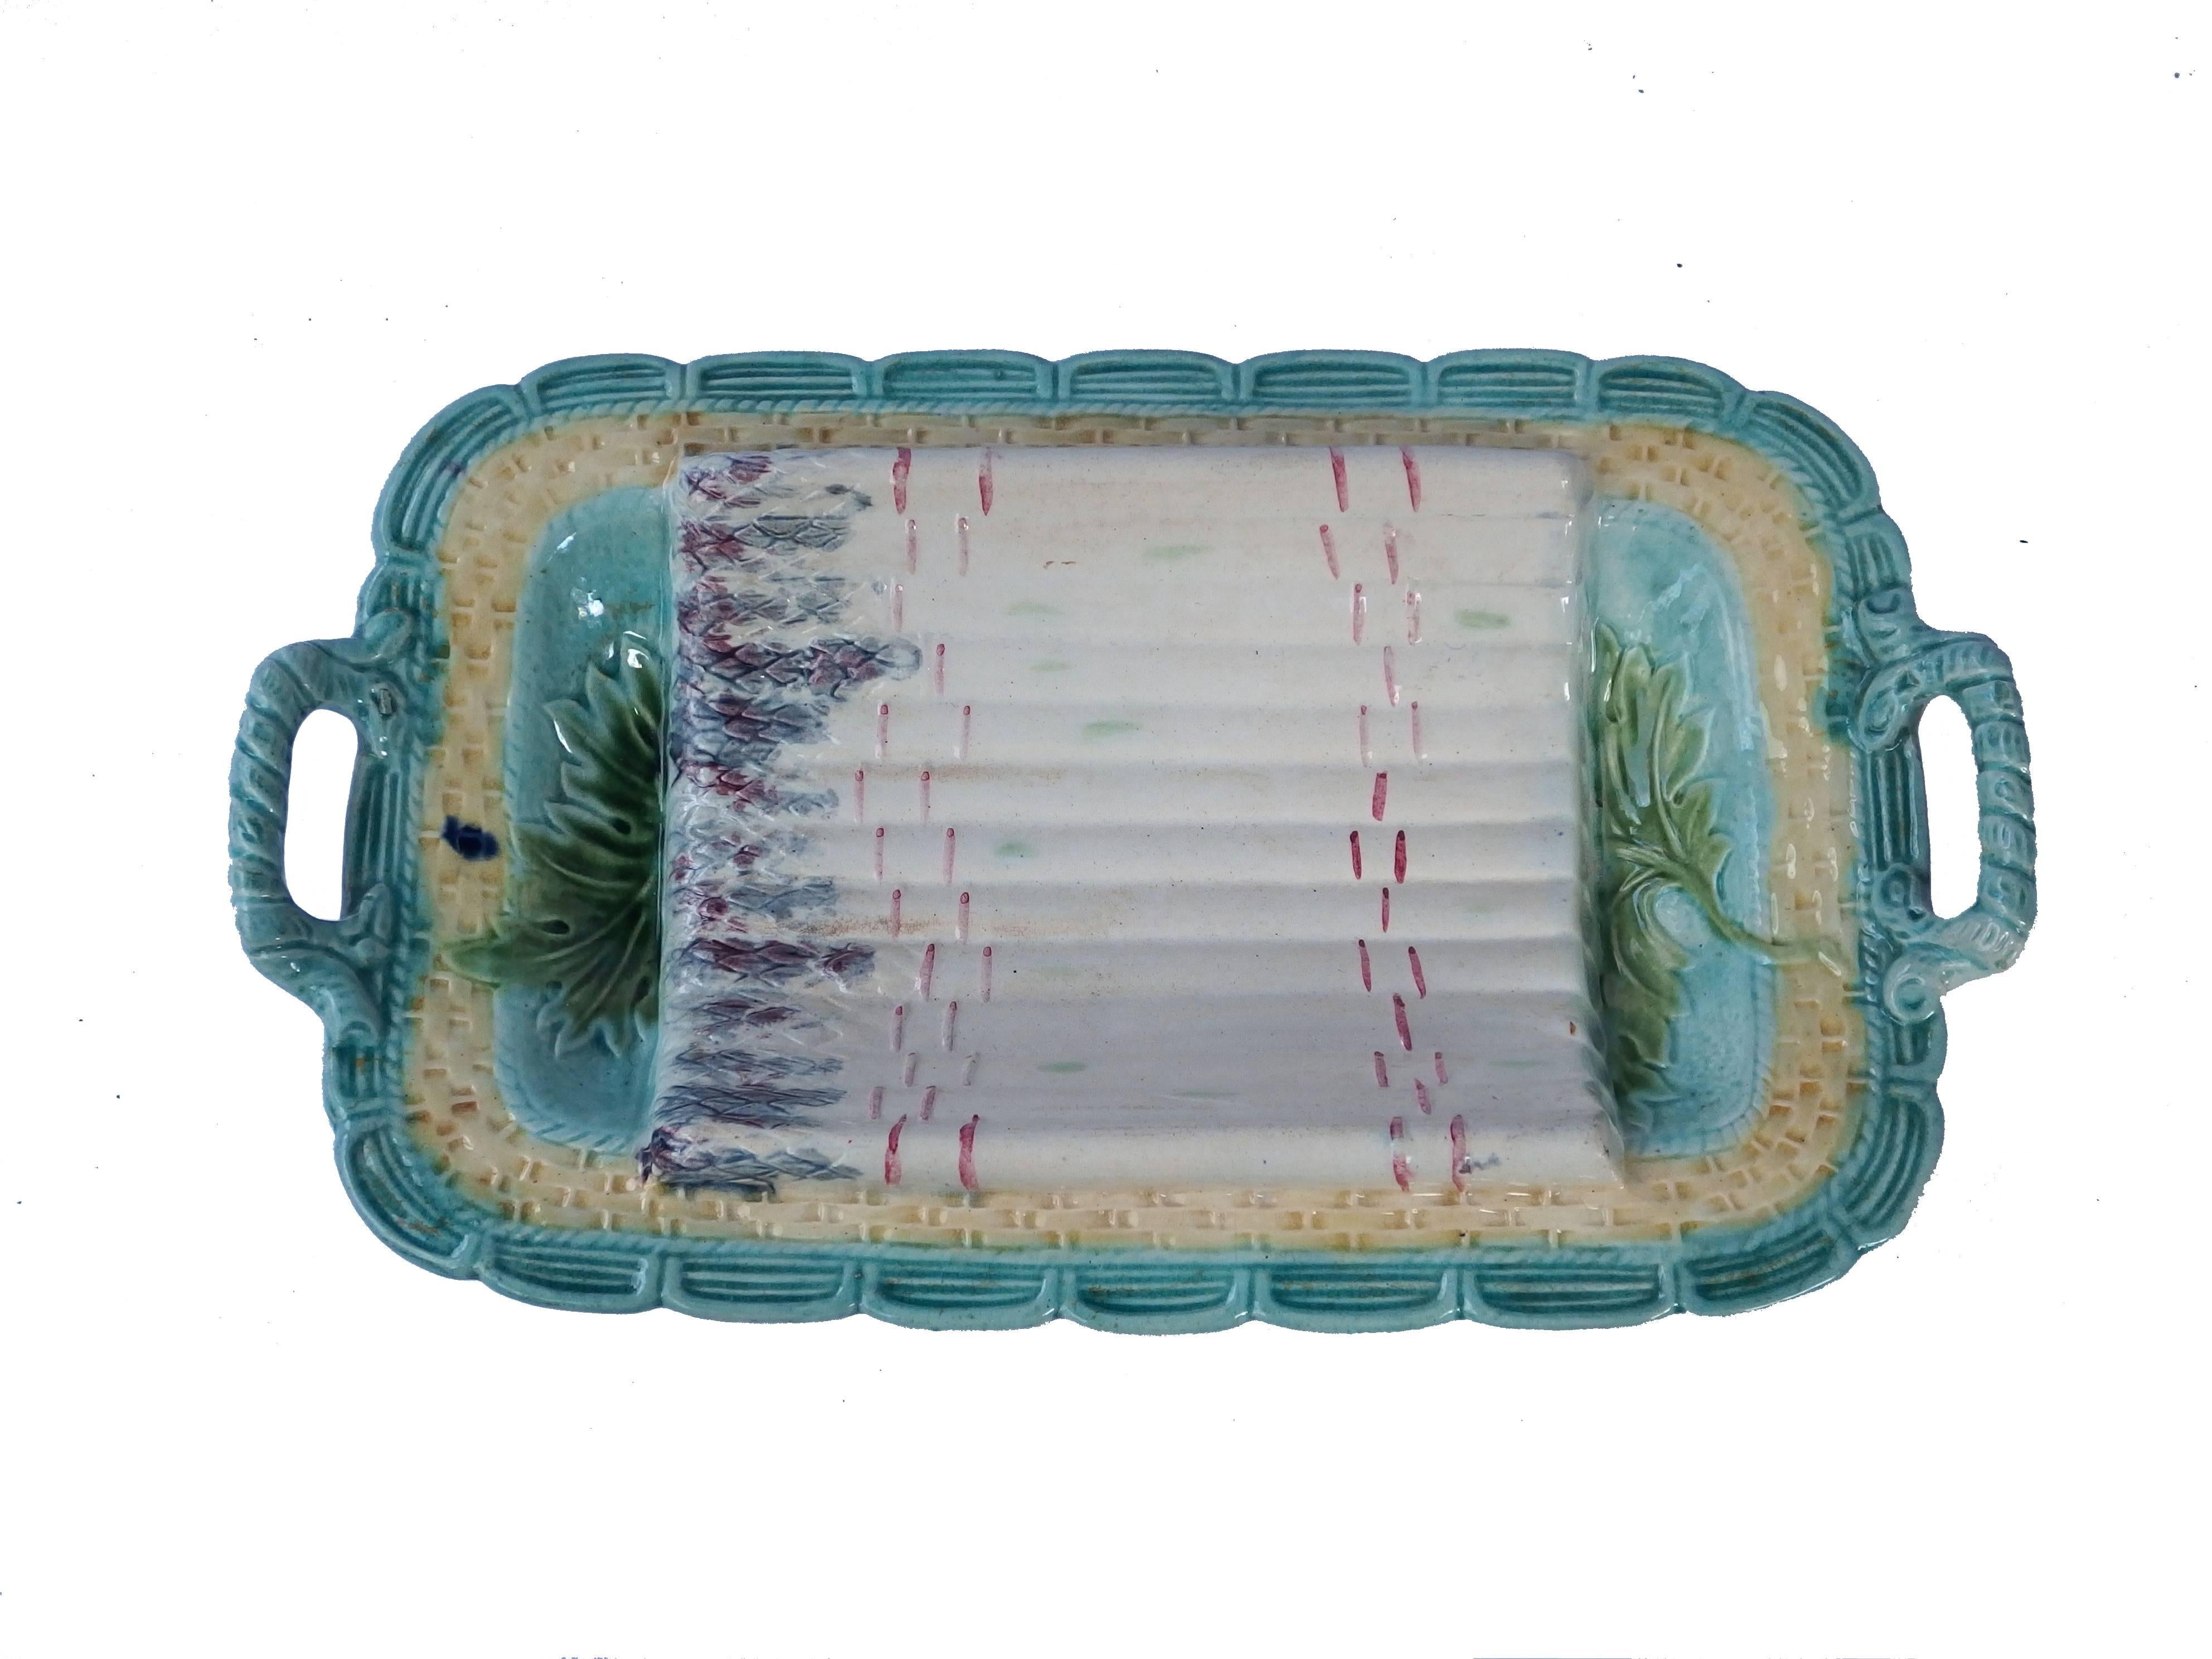 French Majolica asparagus set consisting of one dish and ten plates.
Dimensions: Dish 40 x 25cm, plates diameter 24cm.